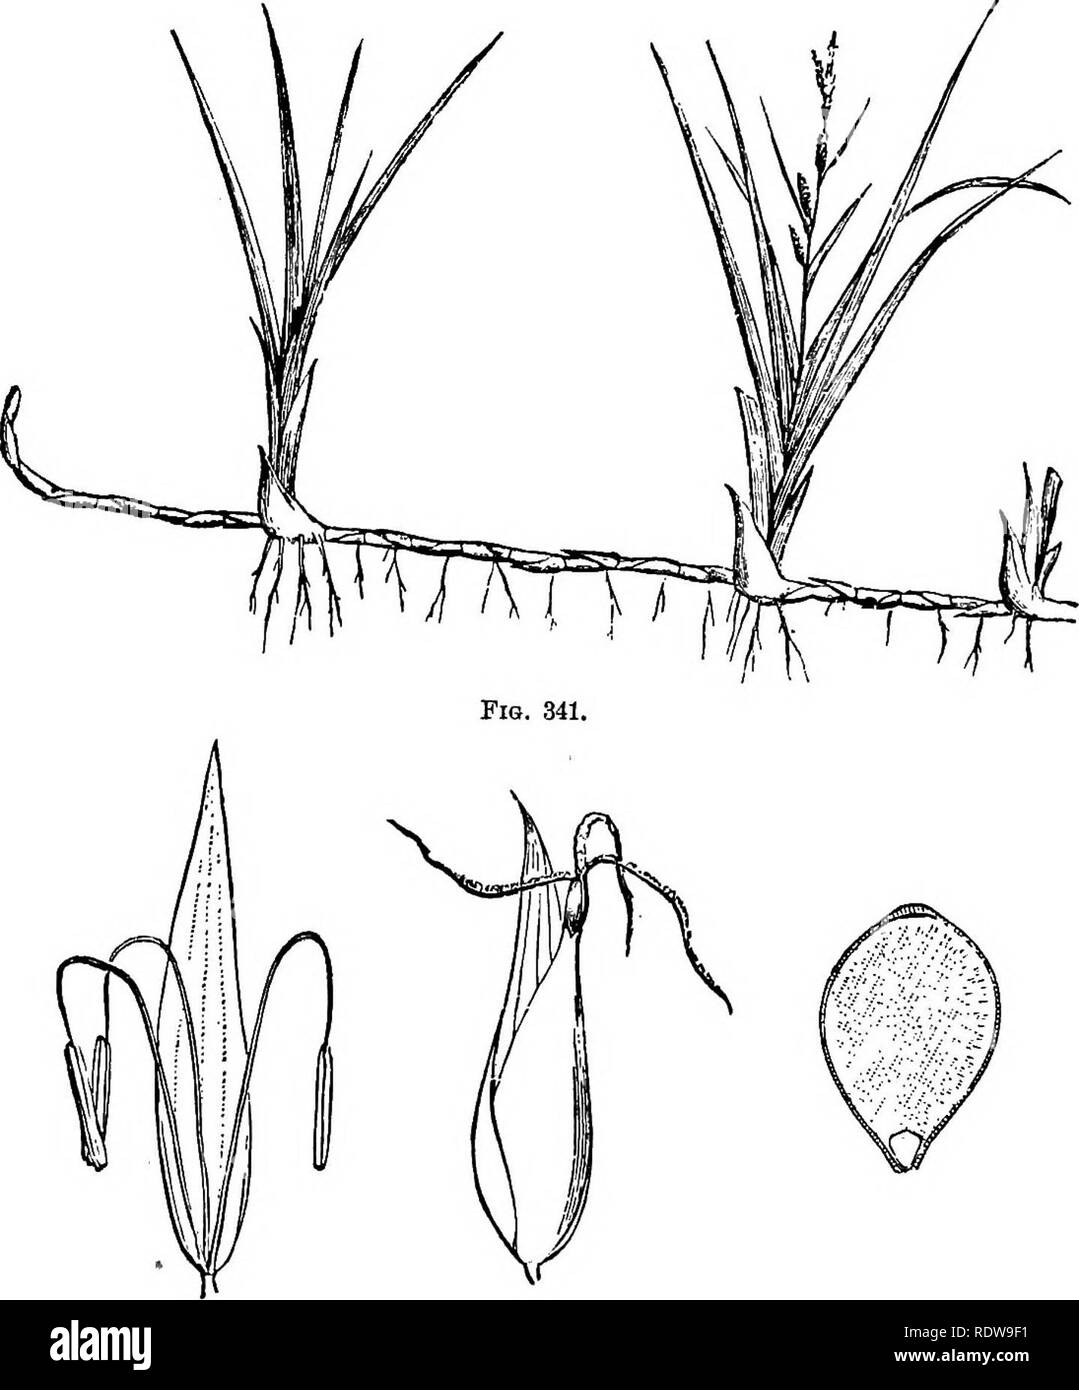 . Botany for high schools and colleges. Botany. -456 BOTANY. merce are made. It is cultivated extensively in the Southern United States, Cuba, Brazil, and, in fact,- in all warm countries of the world. Fioa. 341-4.—Illustratiohs op Cabez.. Fio. 342. Fio. 343. Eio. 344. Fig. 341.—Underground stem, sending up leafy and flowering stems. Fig. 842.—Male flower. Magnified. Fig. 343.—Female flower. Magnified. Fig. 344.—Section of seed. A&amp;gnified. It is a curious fact that while the annual production of cane sugar ia the world is now about 4,000,000,000 pounds, yet five hundred. Please note that t Stock Photo